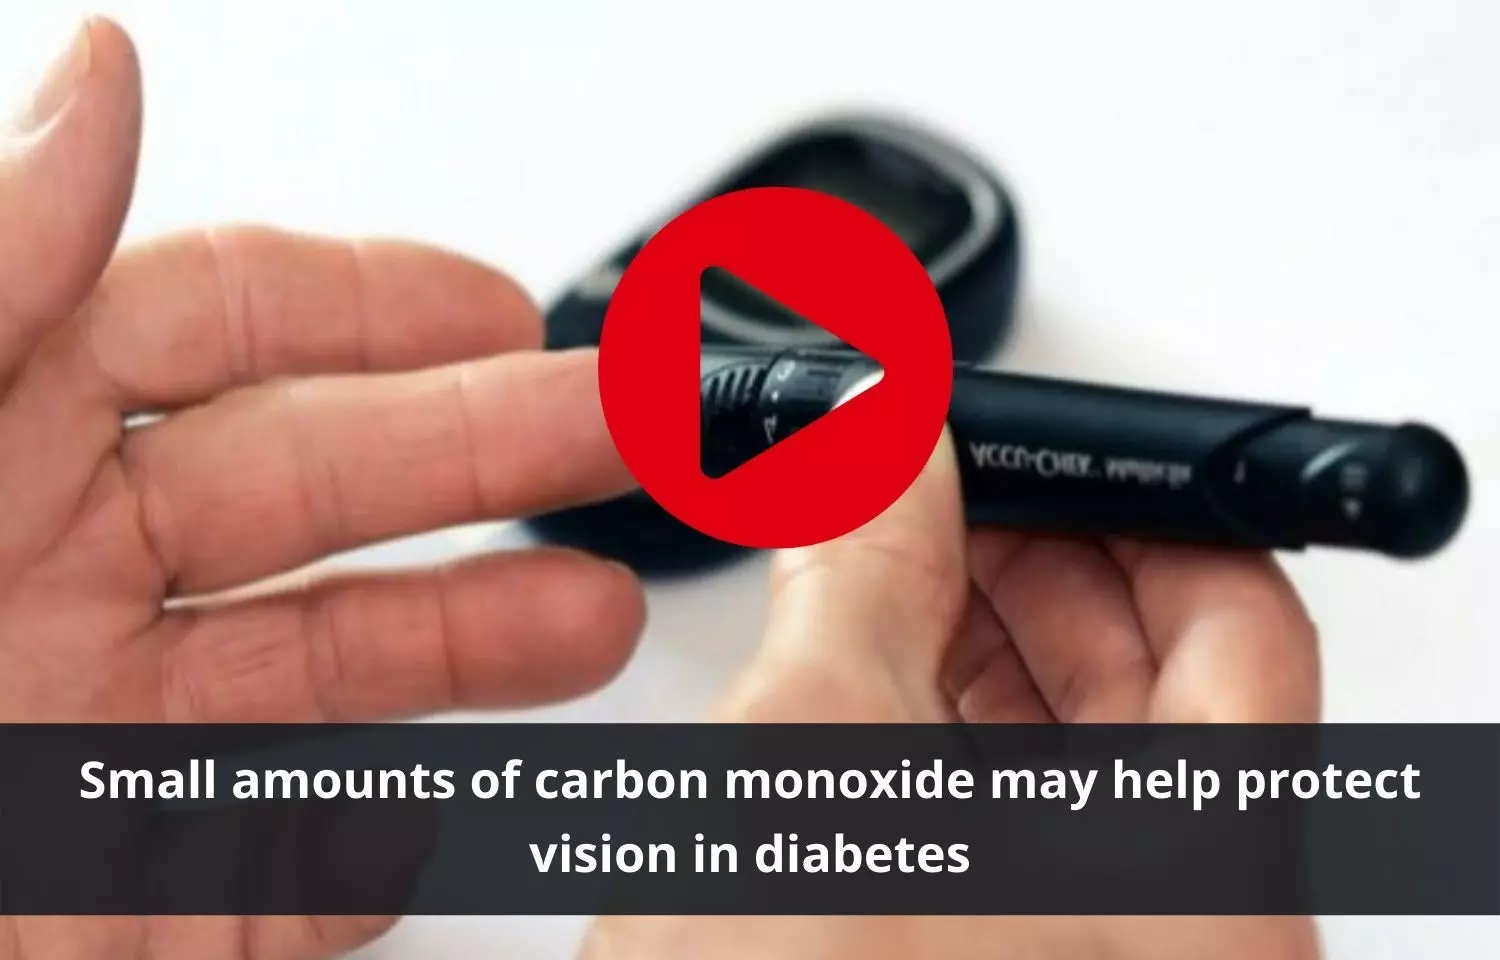 Carbon monoxide in very small amounts to improve vision in diabetes